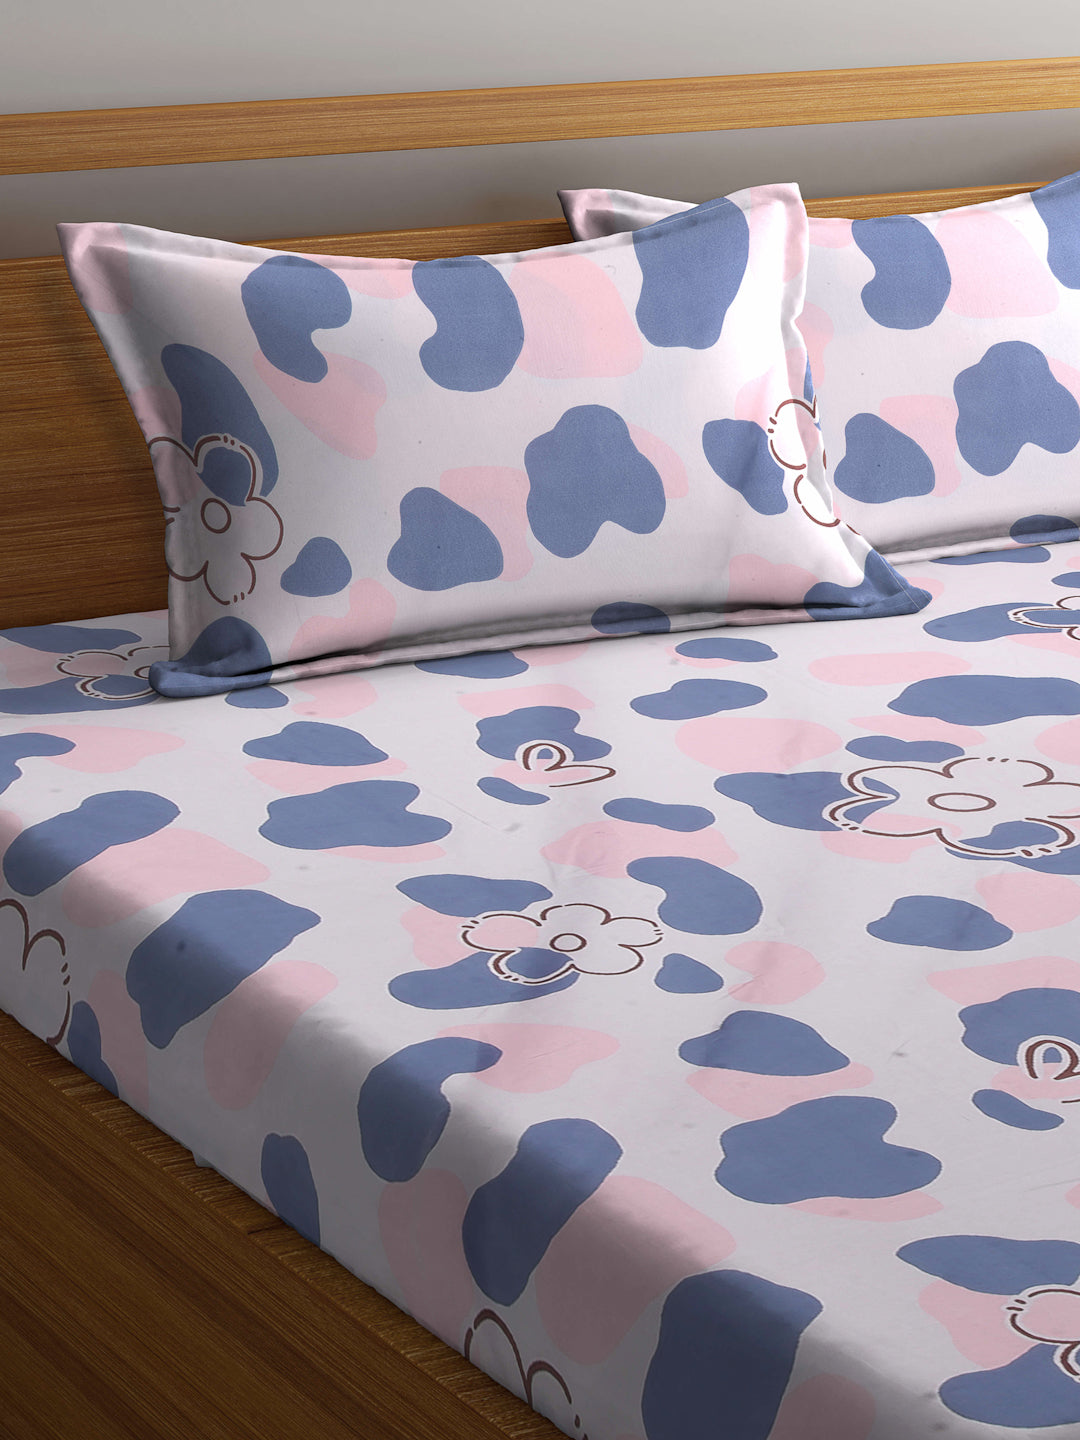 Arrabi Pink Floral TC Cotton Blend King Size Bookfold Bedsheet with 2 Pillow Covers (250 X 215 cm)